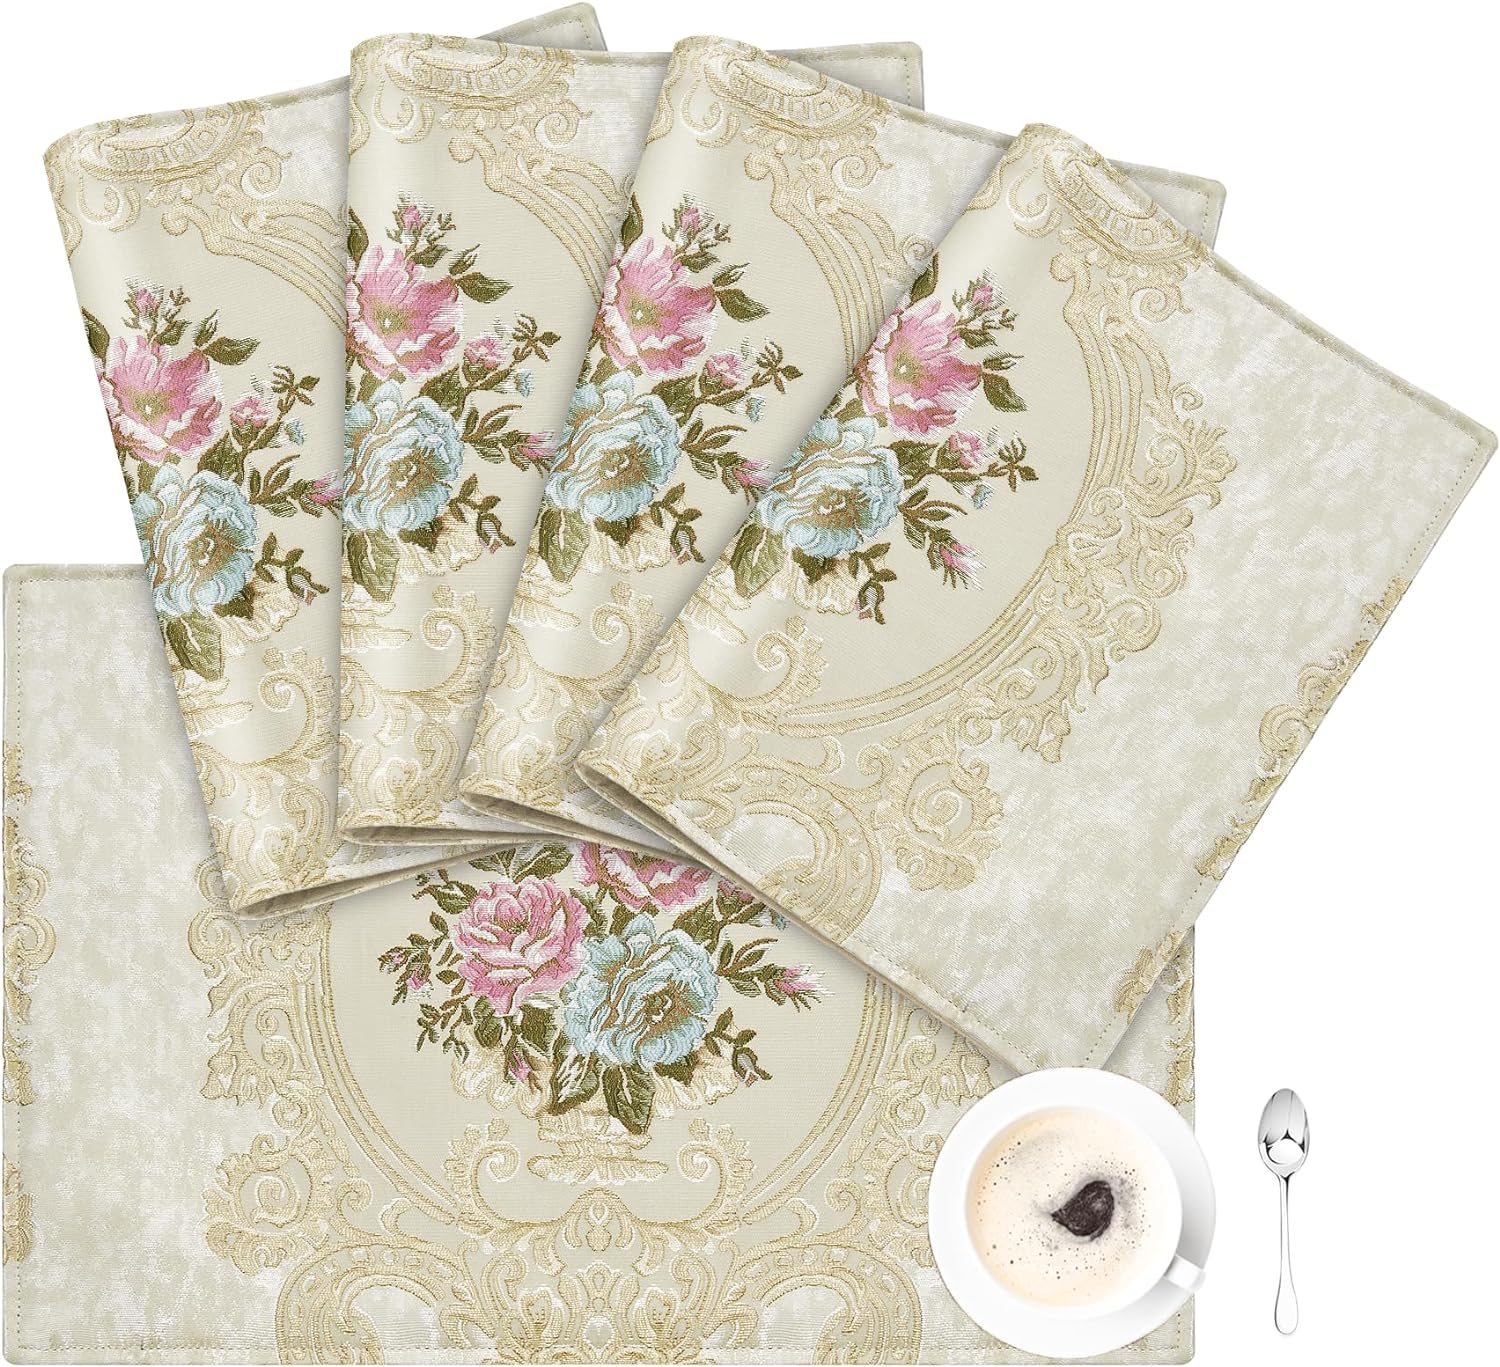 Loom and Mill Luxury Damask Placemats Set of 4, Pearly Beige Jacquard Non-Slip Table Place Mats for Home Kitchen Party Banquet HolidayDecor, Durable & Washable Dining Table Mats(Pearly Beige, 12x18in)